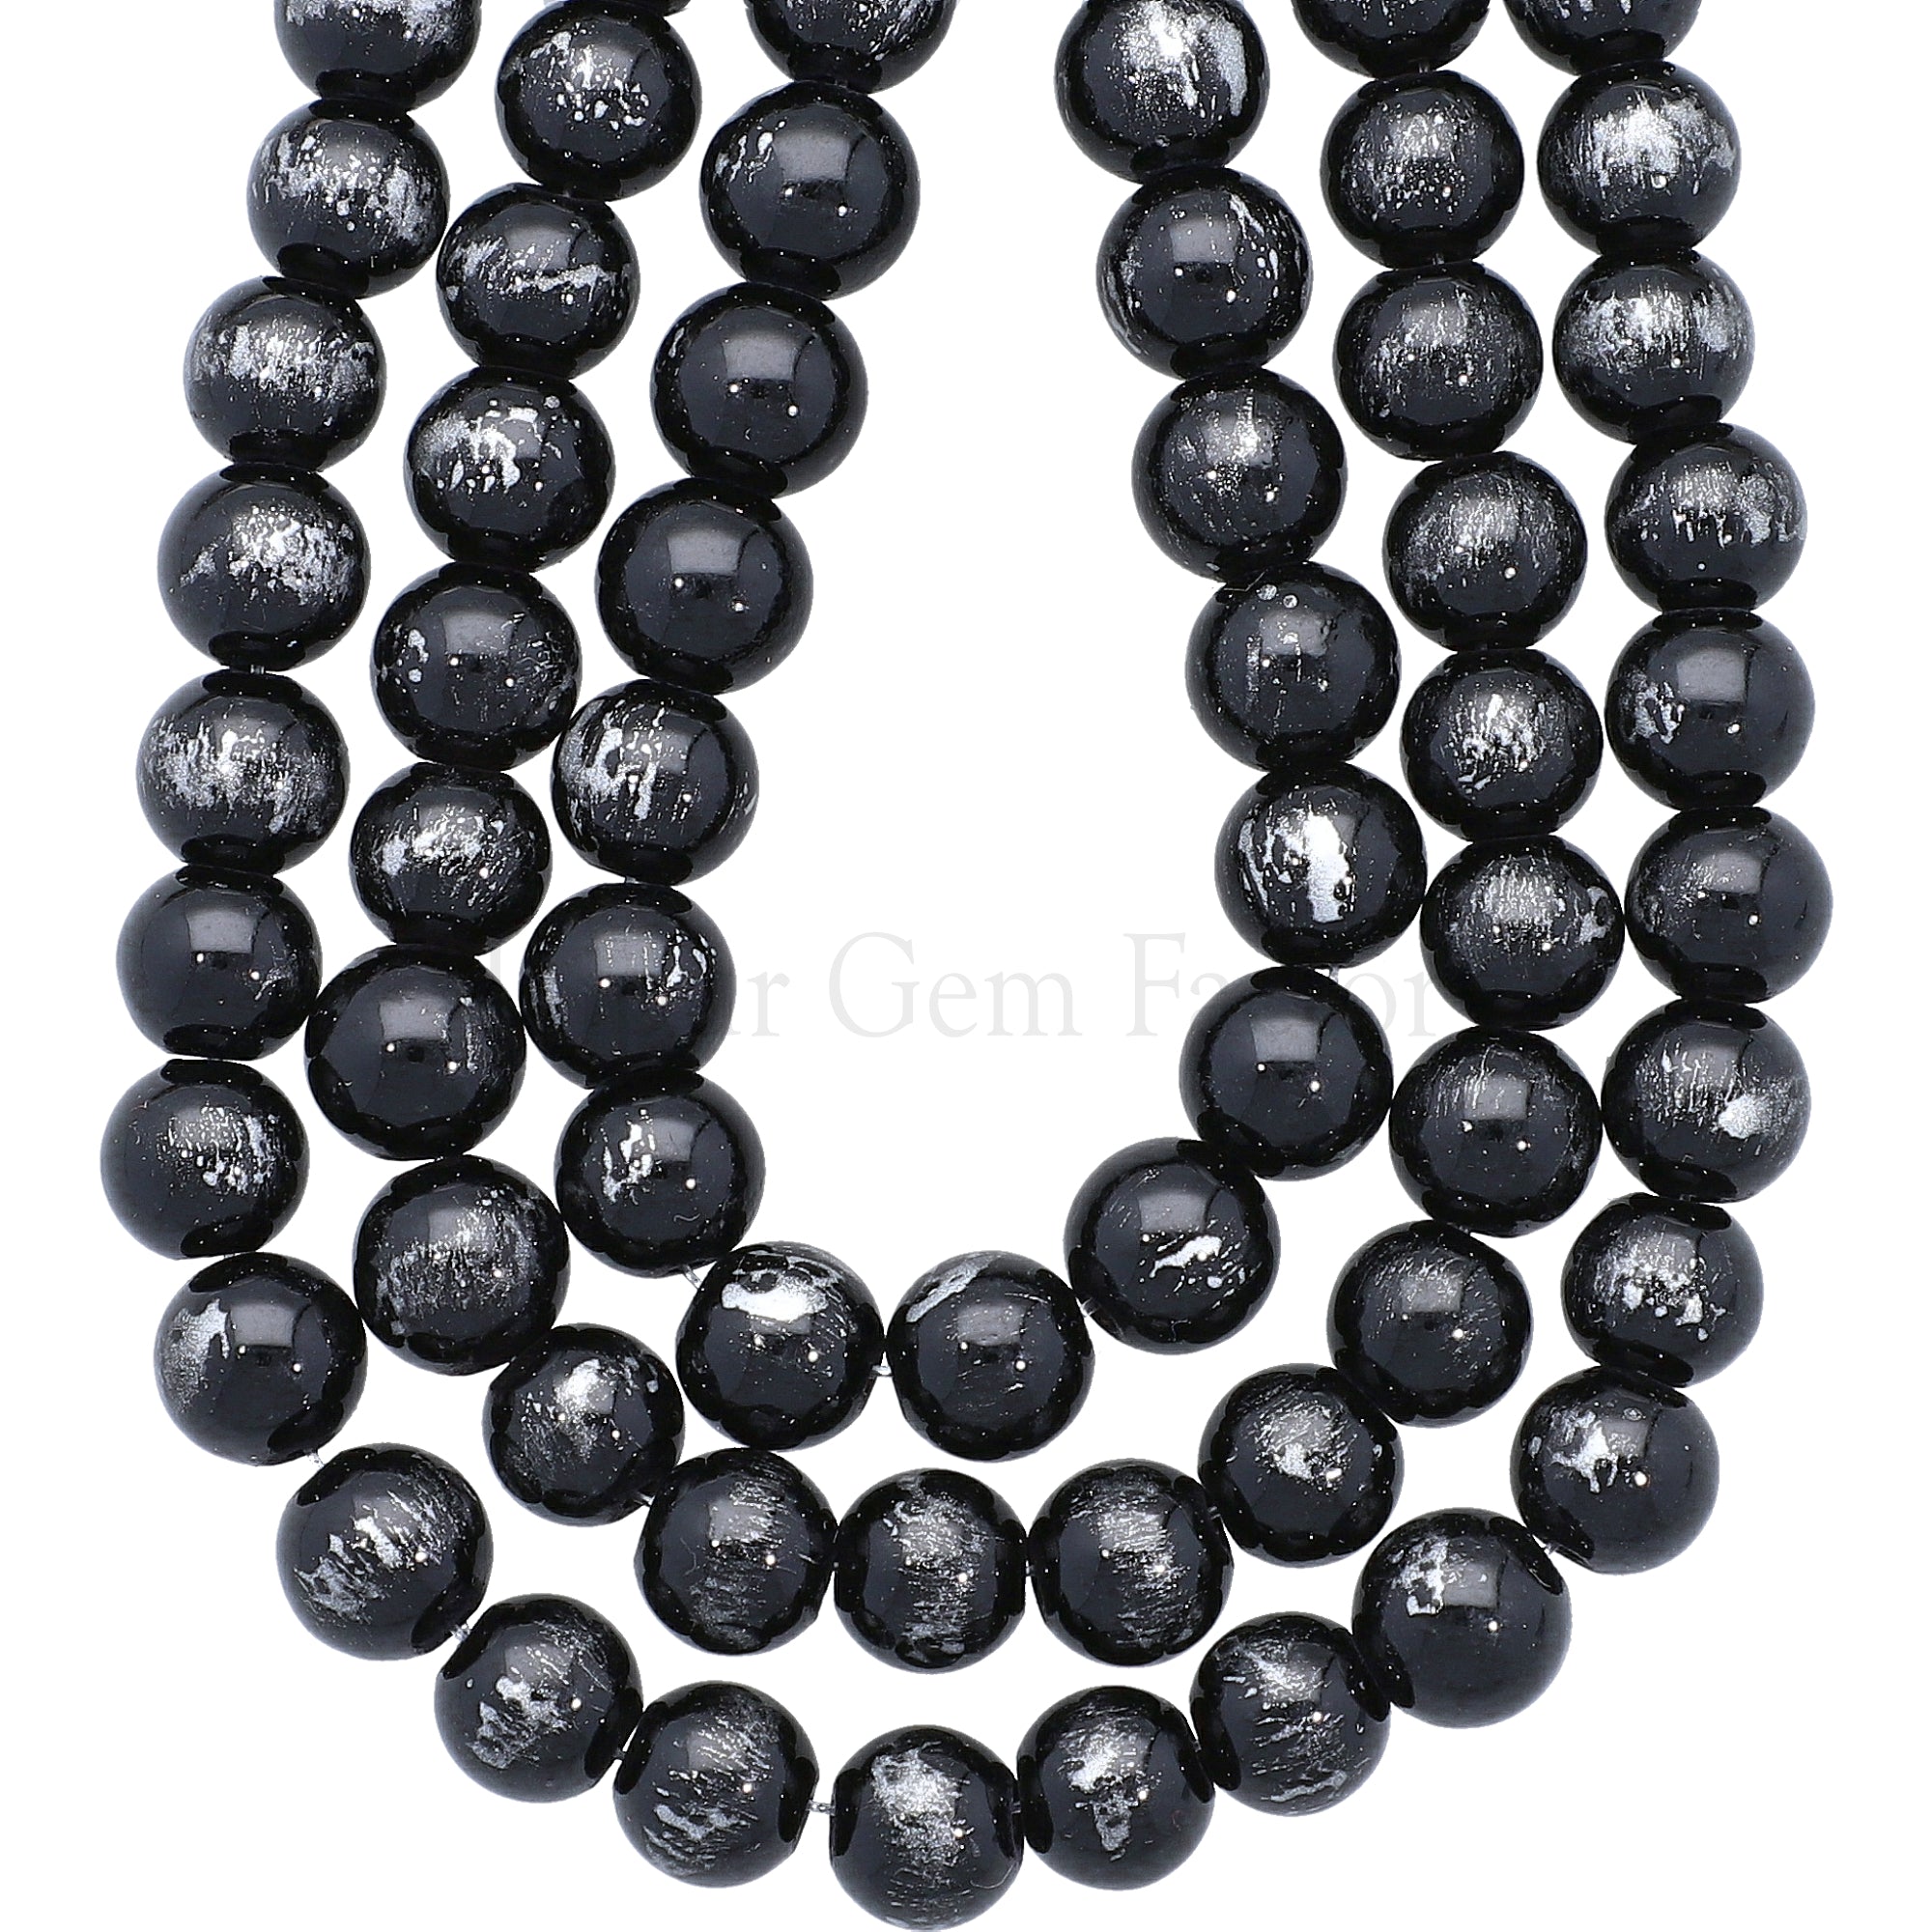 8 MM Silver Leafed Dyed Black Jade Smooth Round Beads 15 Inches Strand